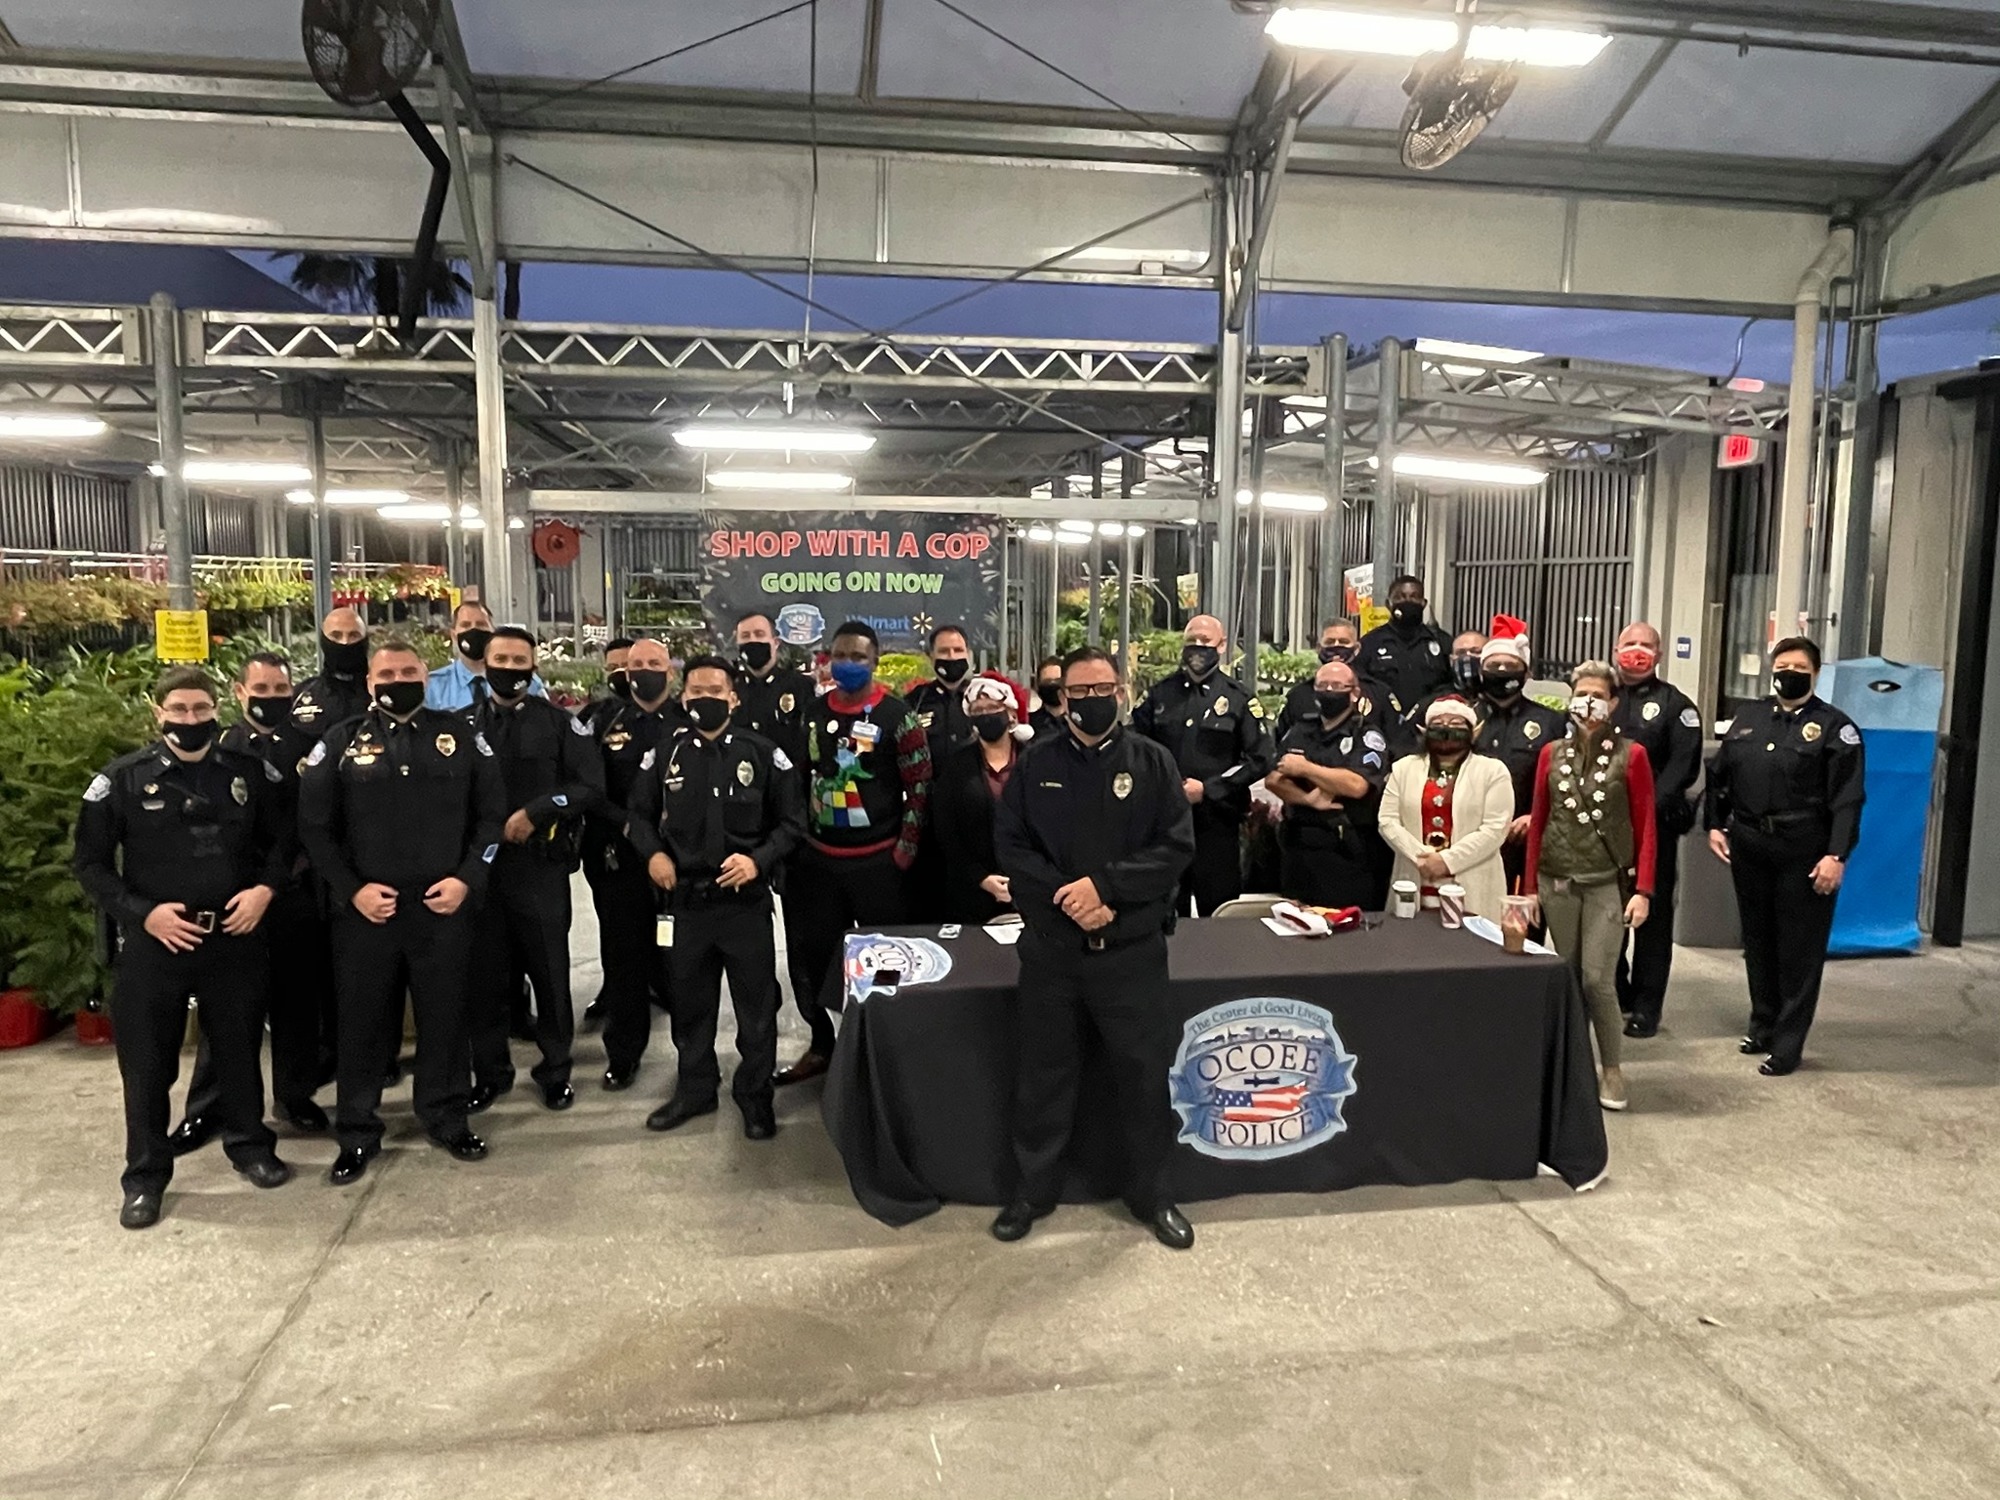 This year, Ocoee police officers were joined by some Windermere police officers for the Ocoee department’s annual Shop with a Cop event. (Courtesy Ocoee Police Department)